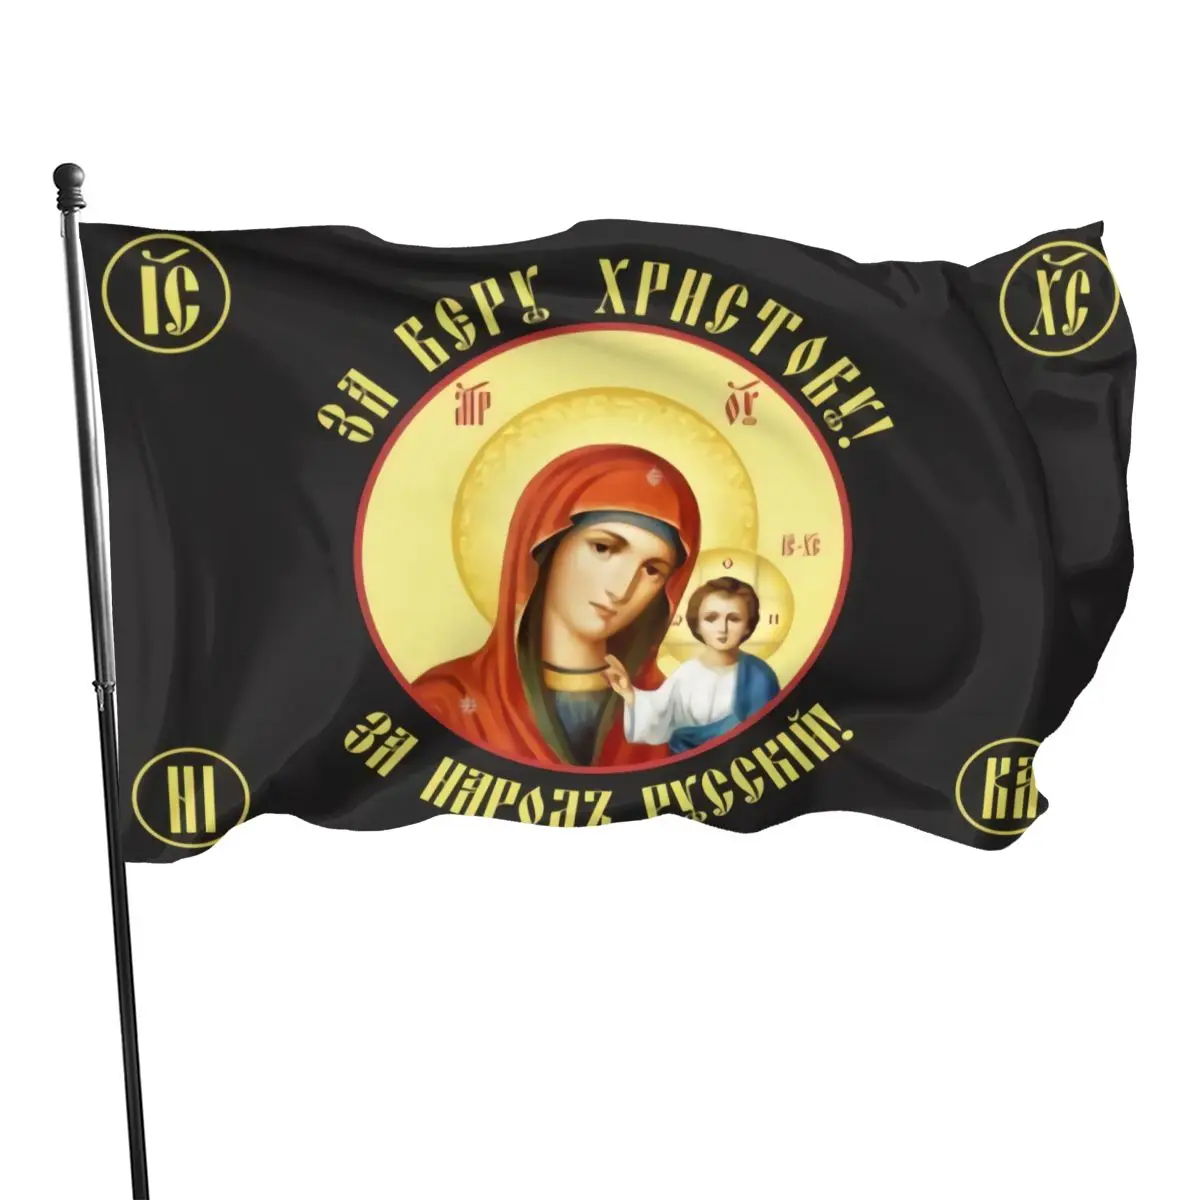 Russian Empire believes in Christian flag, Virgin Mary and Jesus 3 ft x 5 ft 150 * 90 cm custom flag